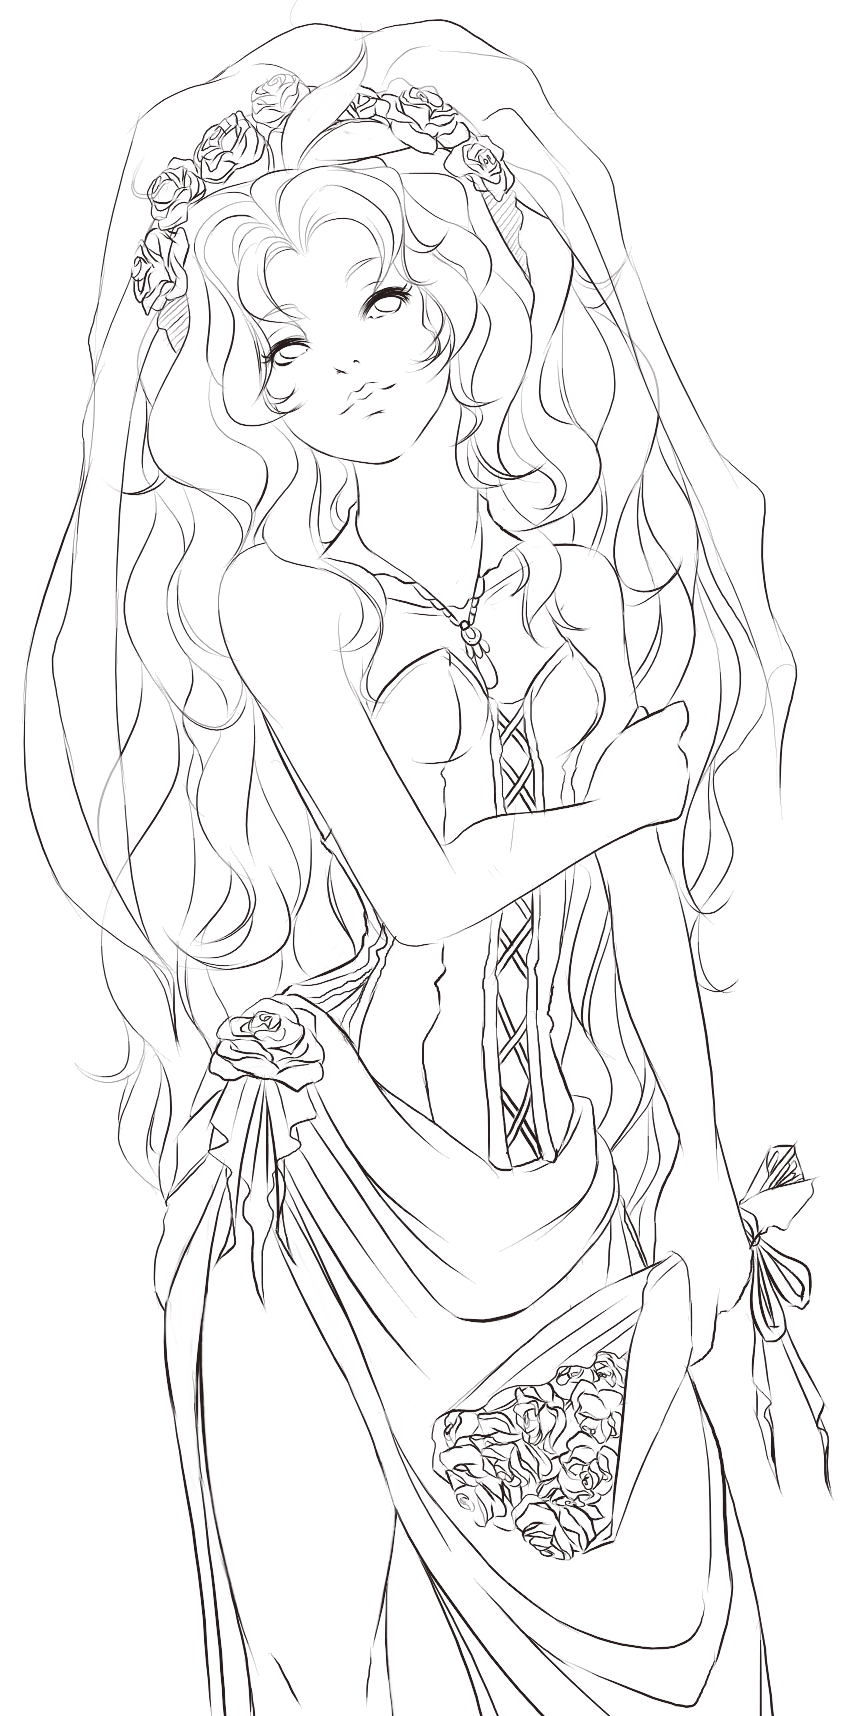 Lavvis Wedding COLORING PAGE by Checkered-Fedora on DeviantArt